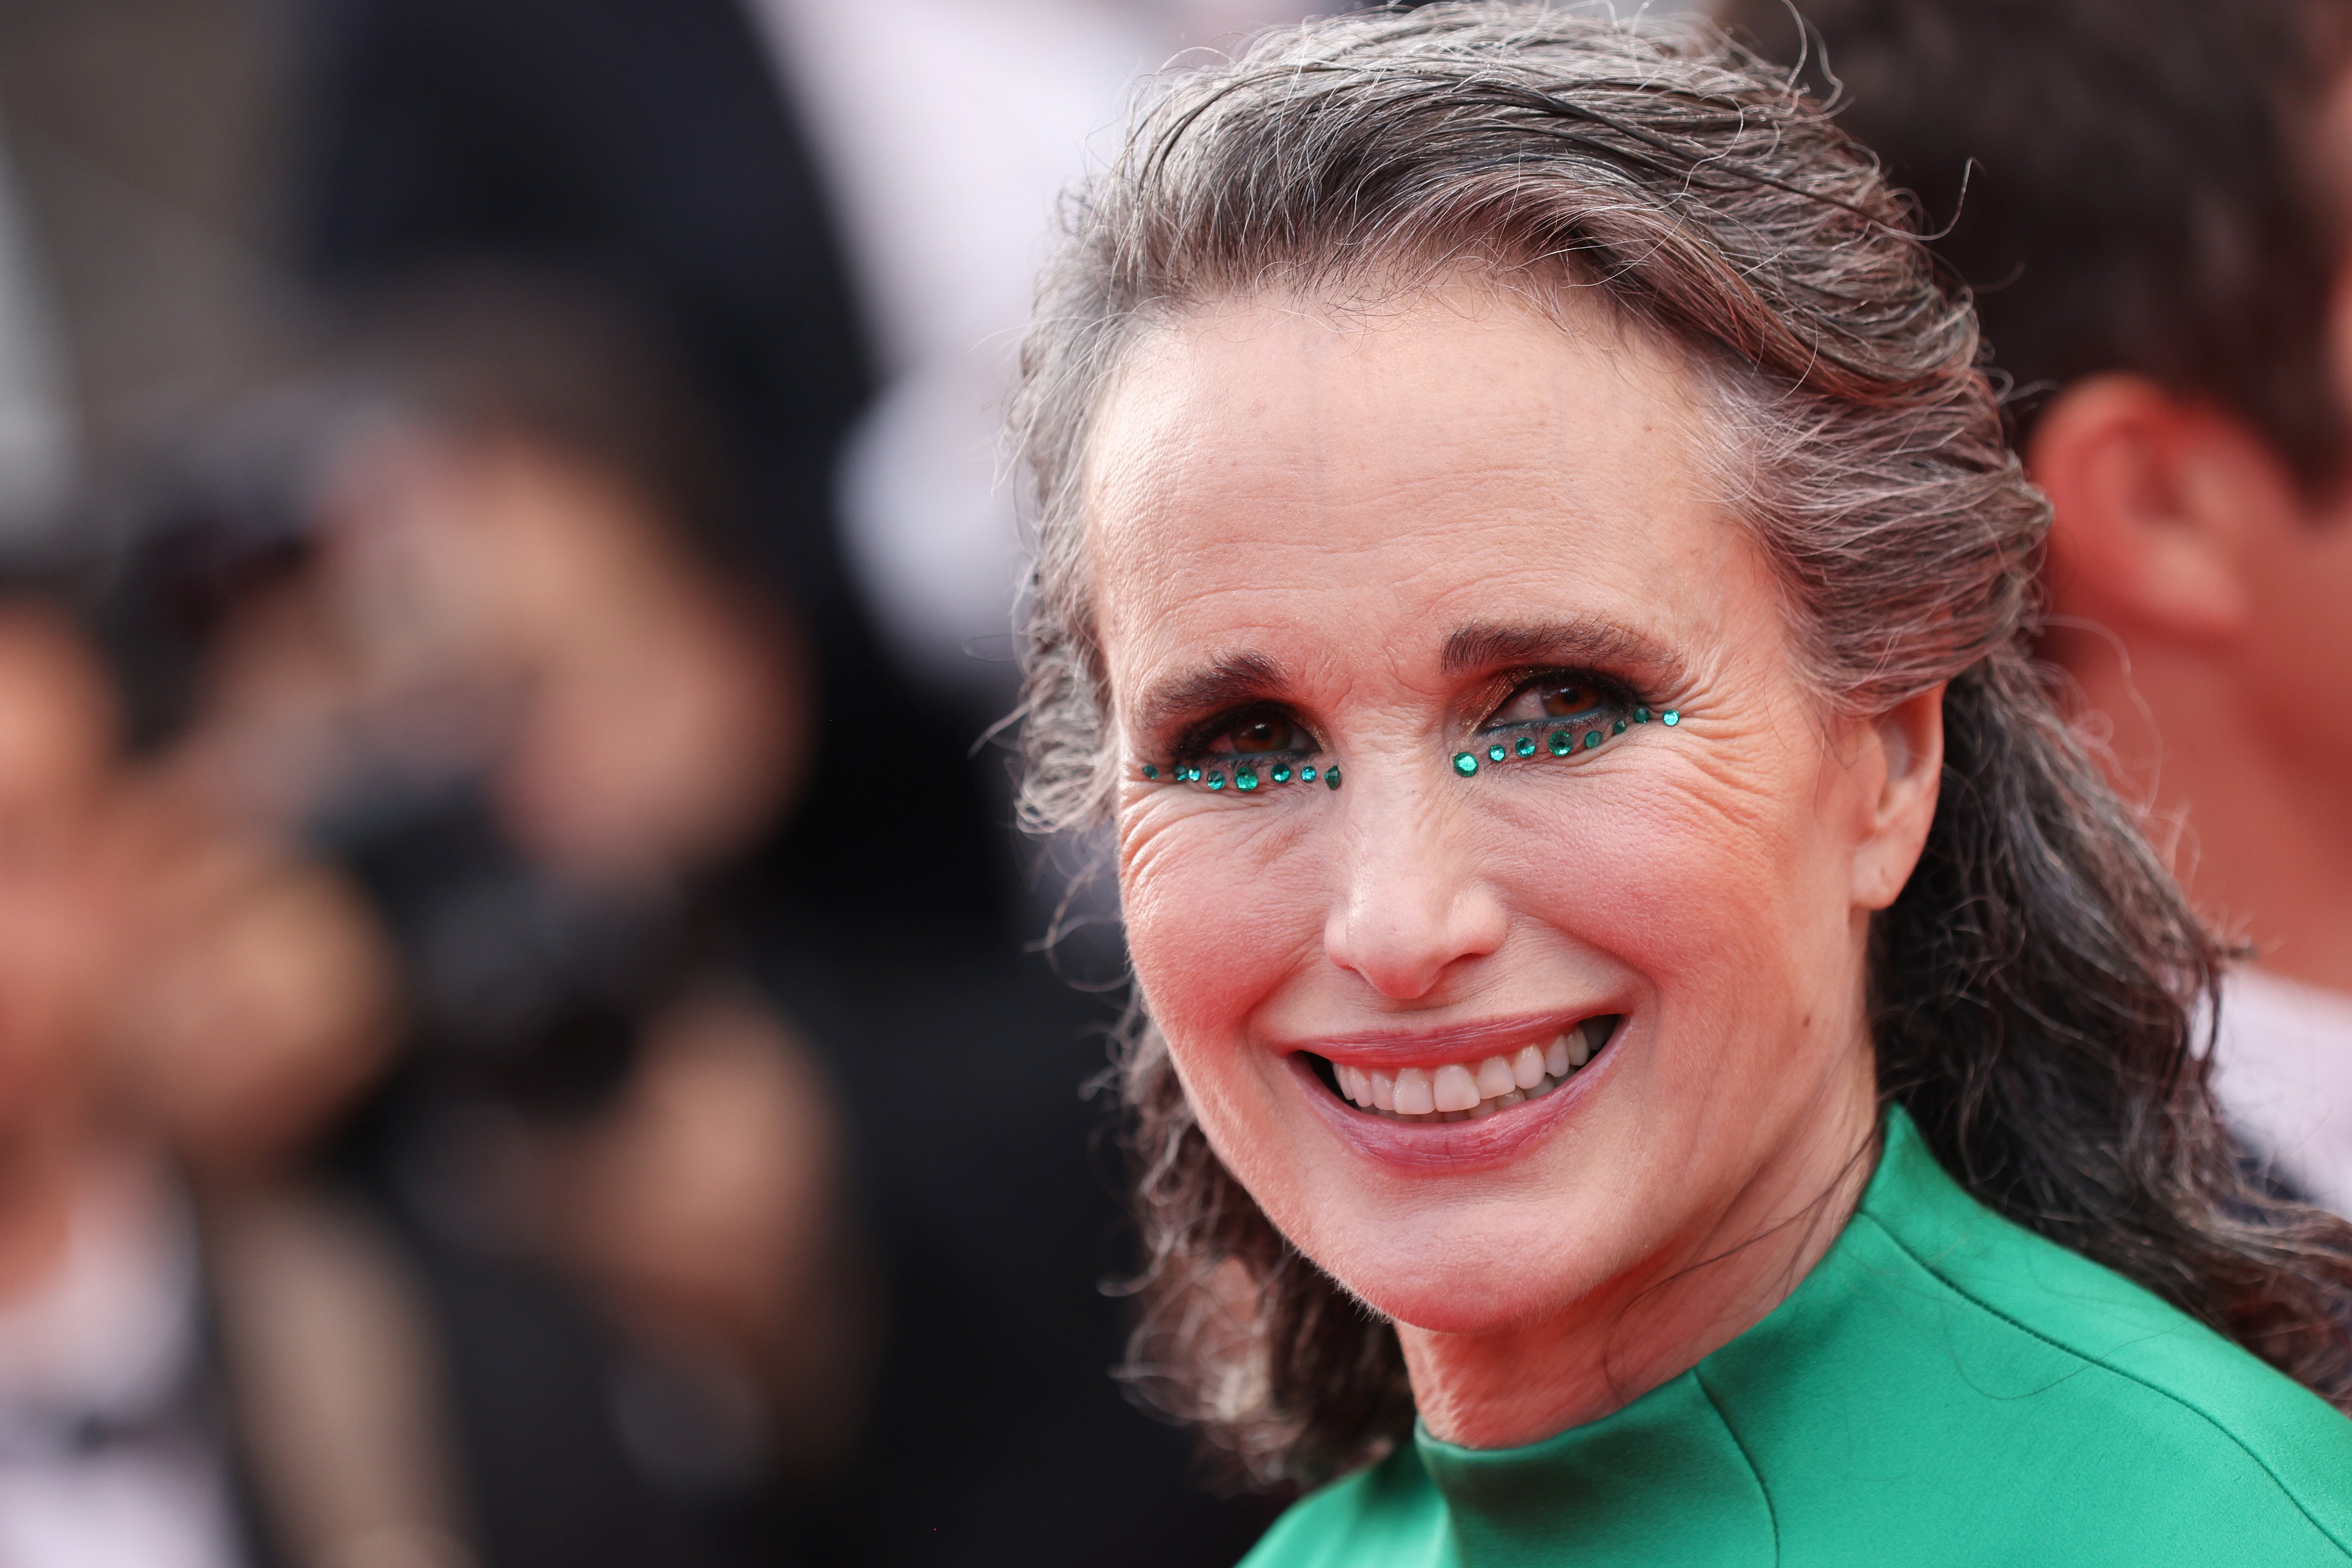 Andie MacDowell at Palais des Festivals on May 28, 2022 in Cannes, France | Source: Getty Images